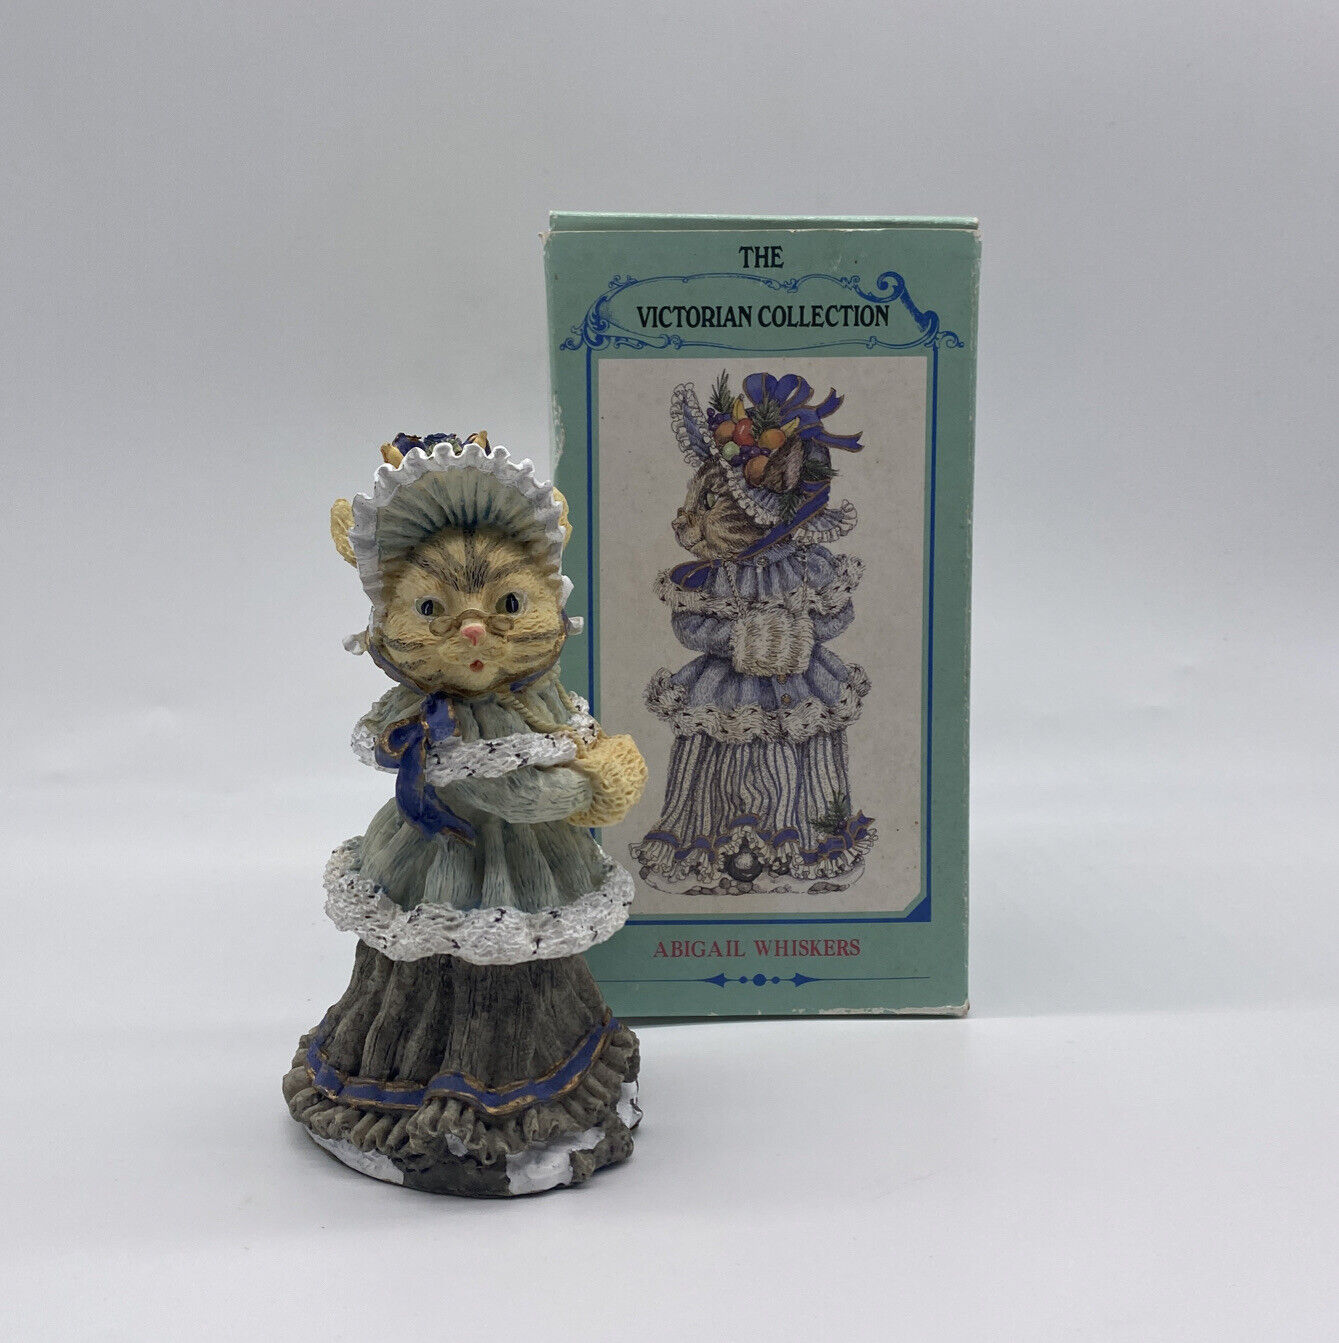 Vintage Victorian Collection Abigail Whiskers Figurine With Original Box